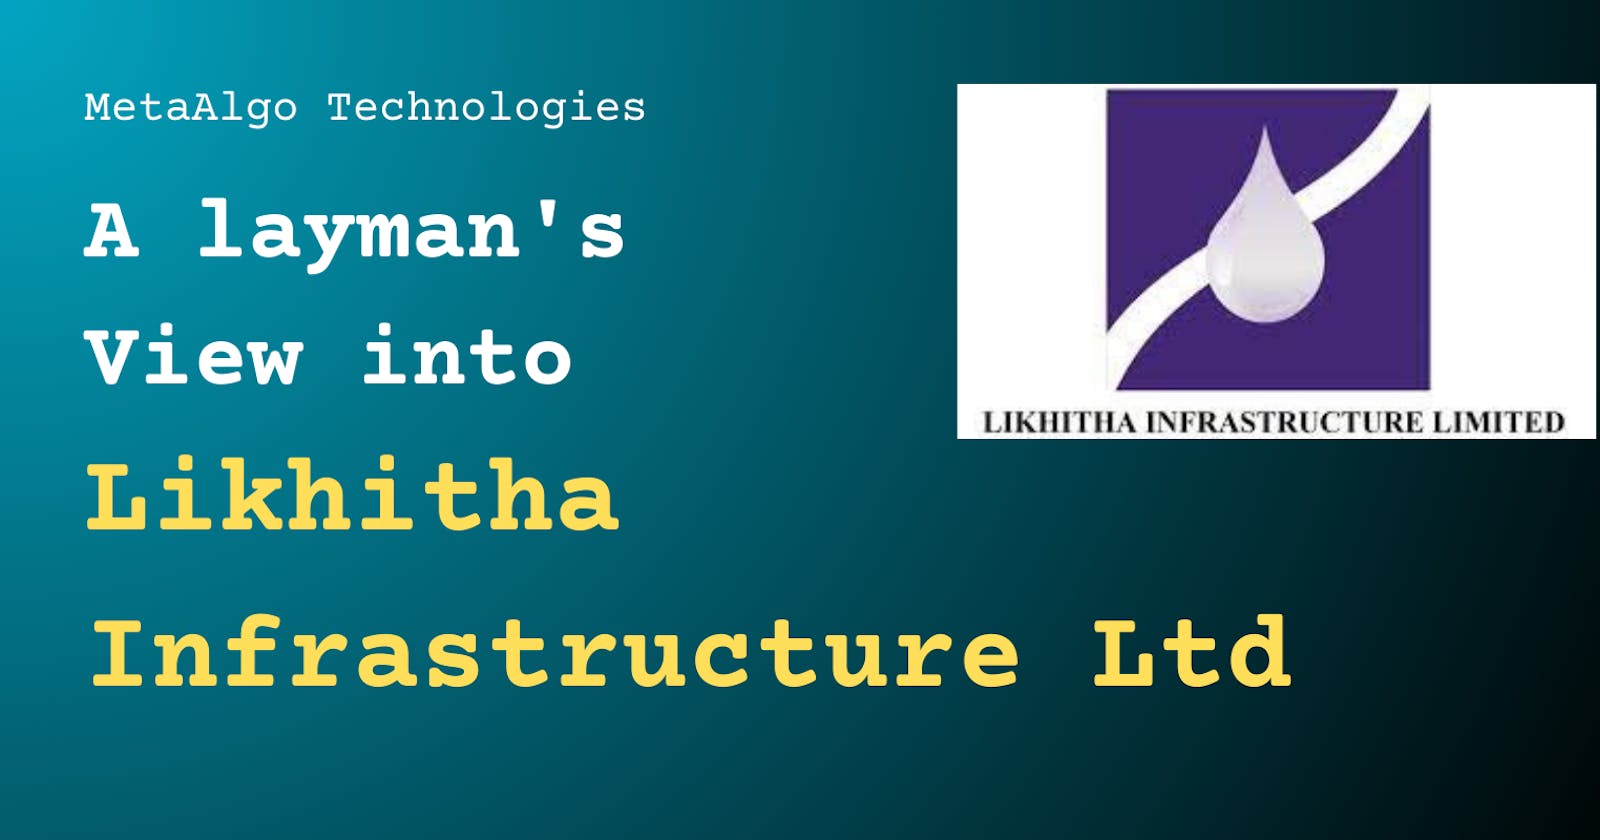 A layman's View into Likhitha Infrastructure Ltd